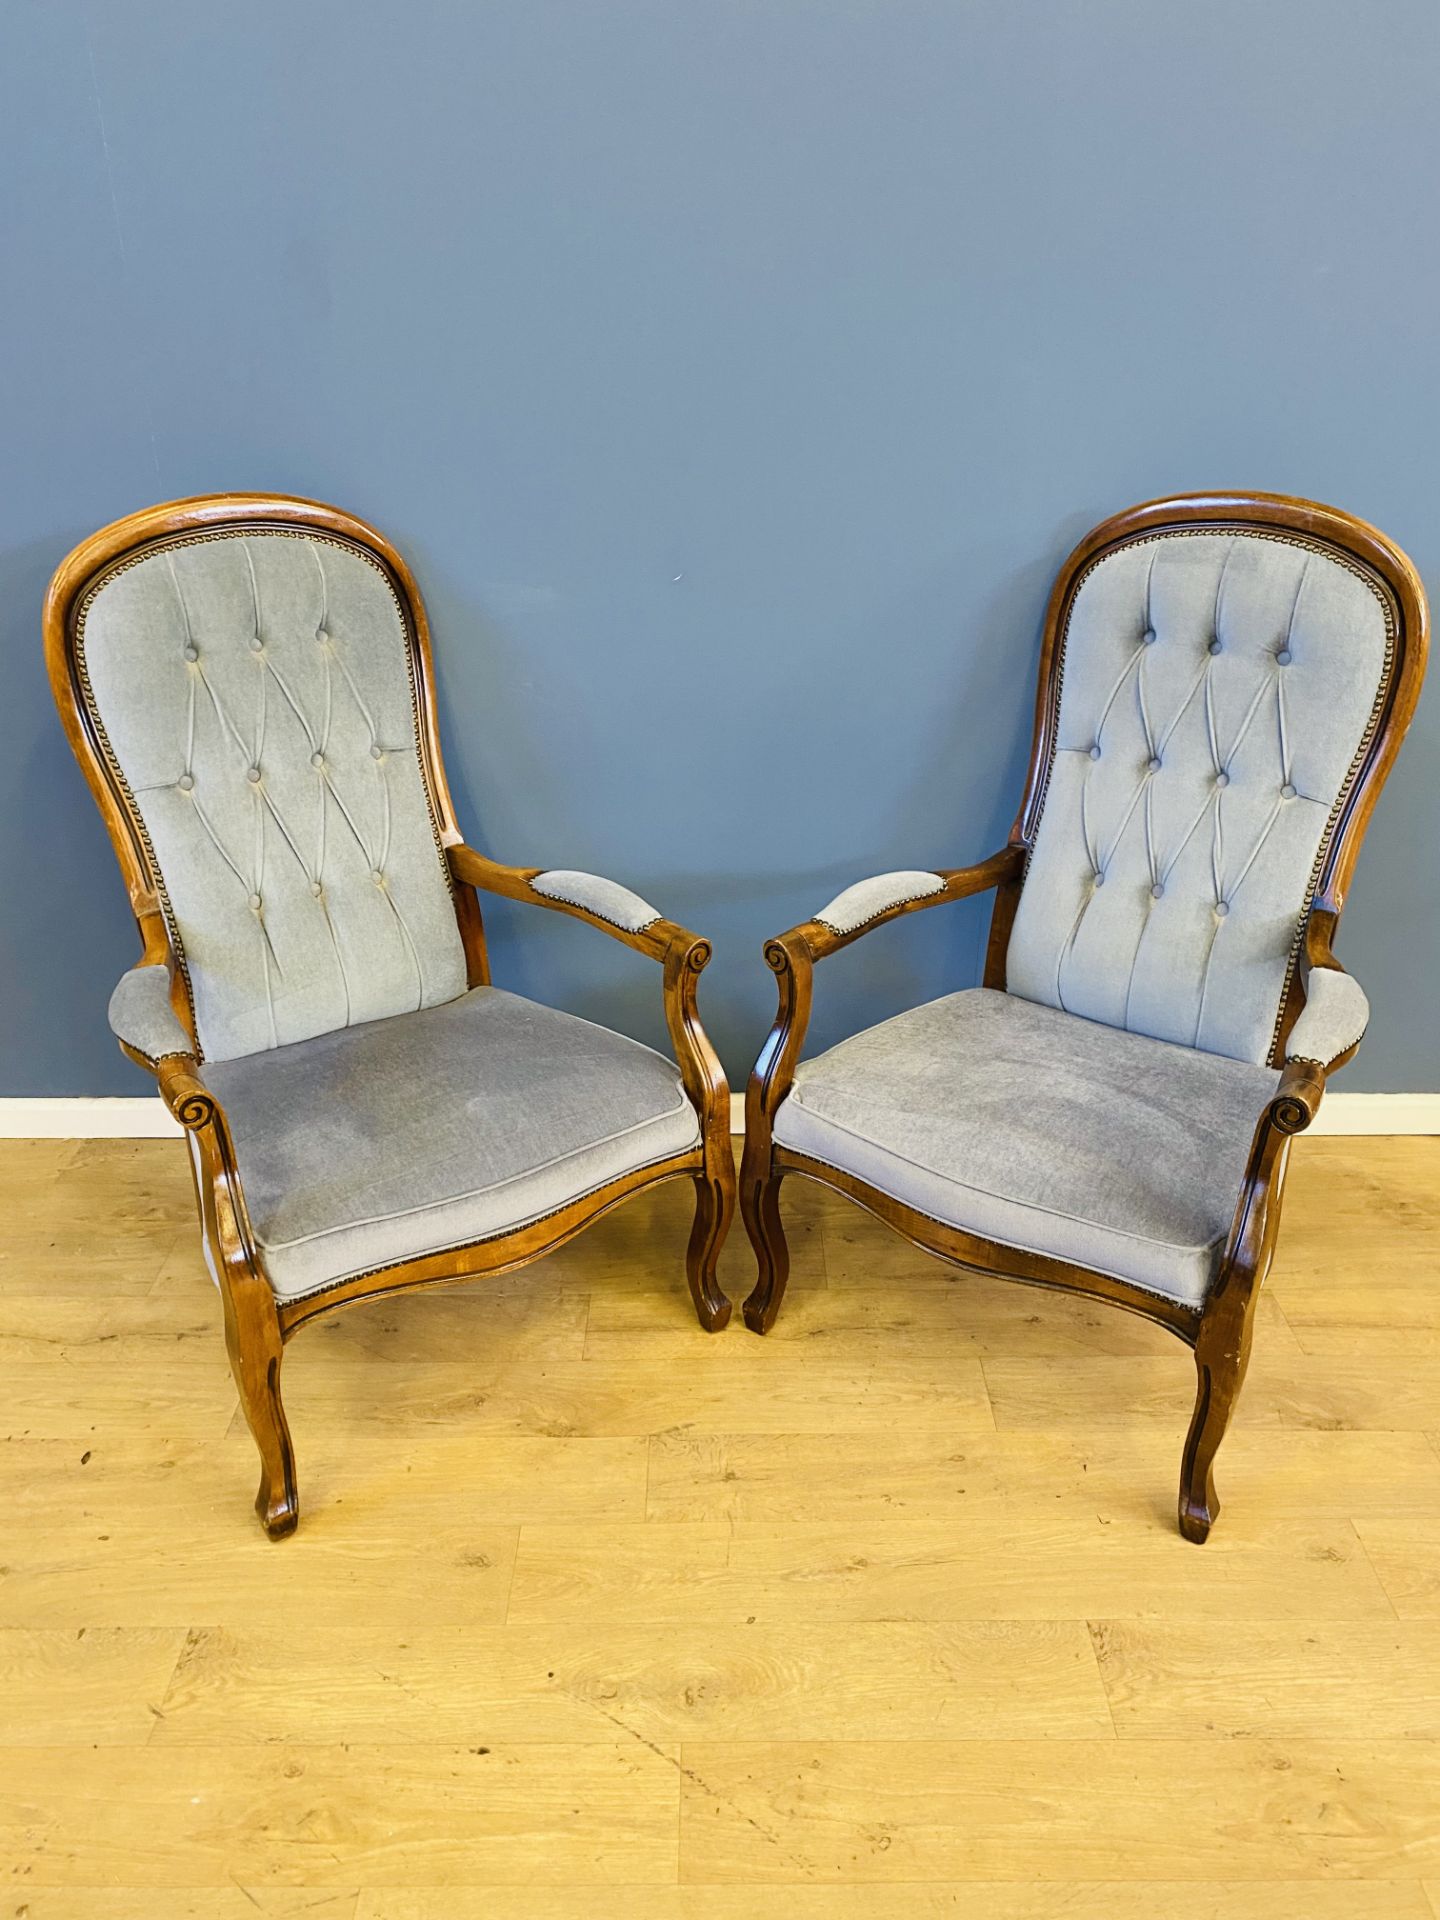 Pair of button back elbow chairs - Image 2 of 4